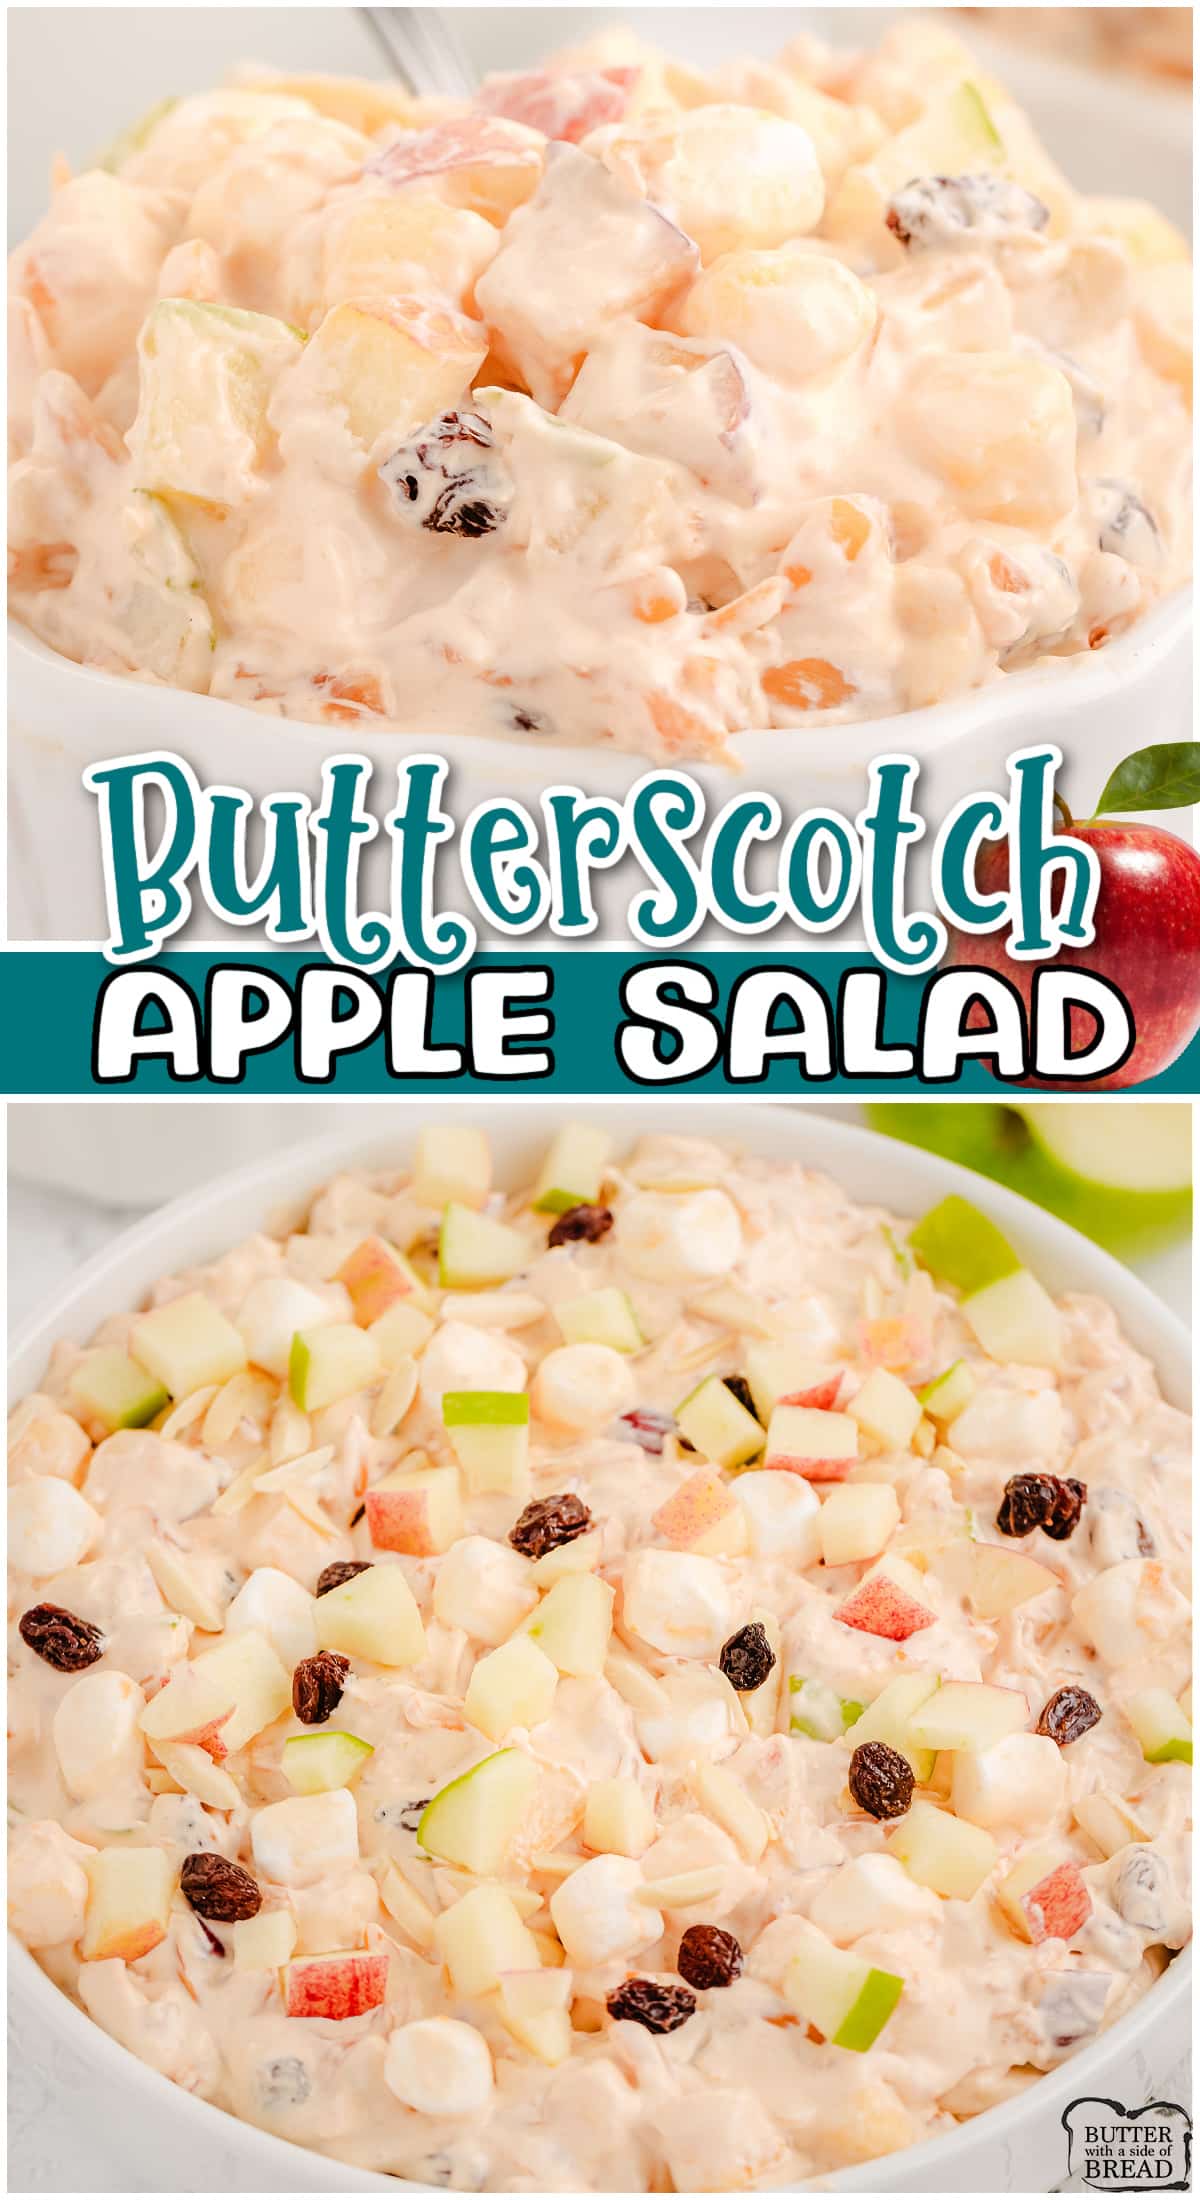 Butterscotch Apple Salad is a delightful sweet, creamy salad bursting with Fall flavors! Easy fruit salad made with crushed pineapple, butterscotch pudding mix, apples, raisins & almonds!